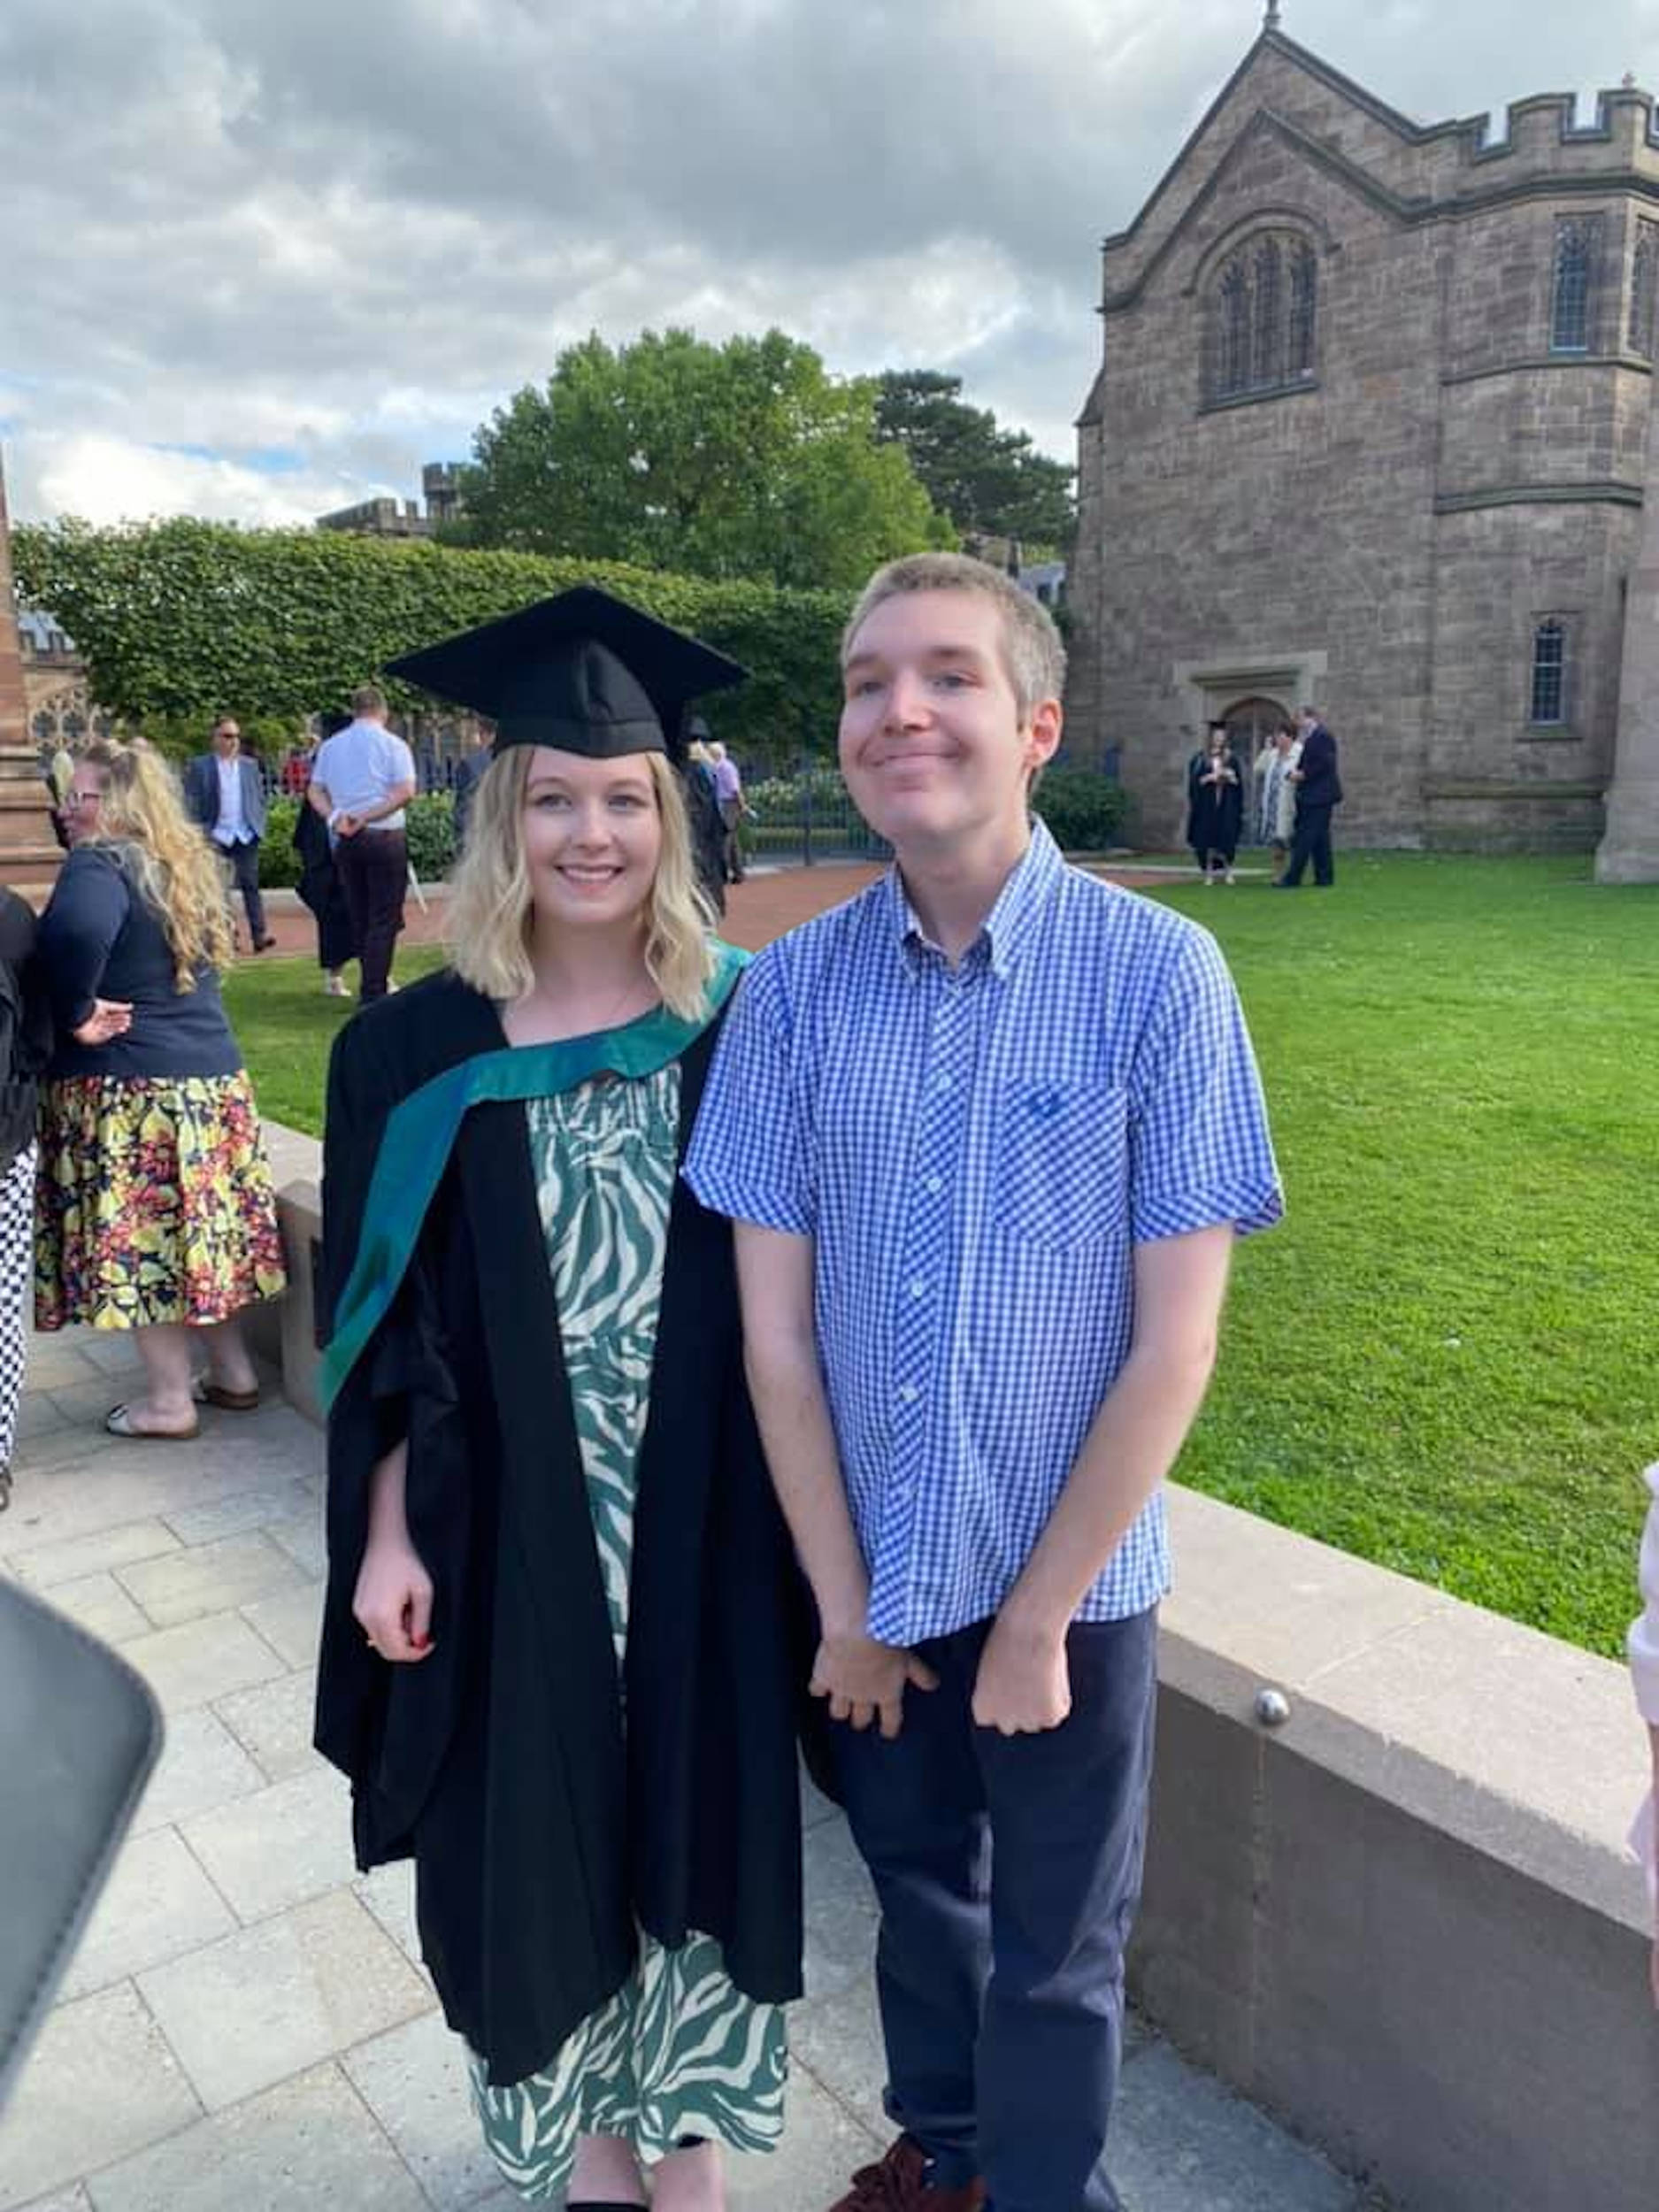 Jack pictured with his younger sister Abbey at her graduation